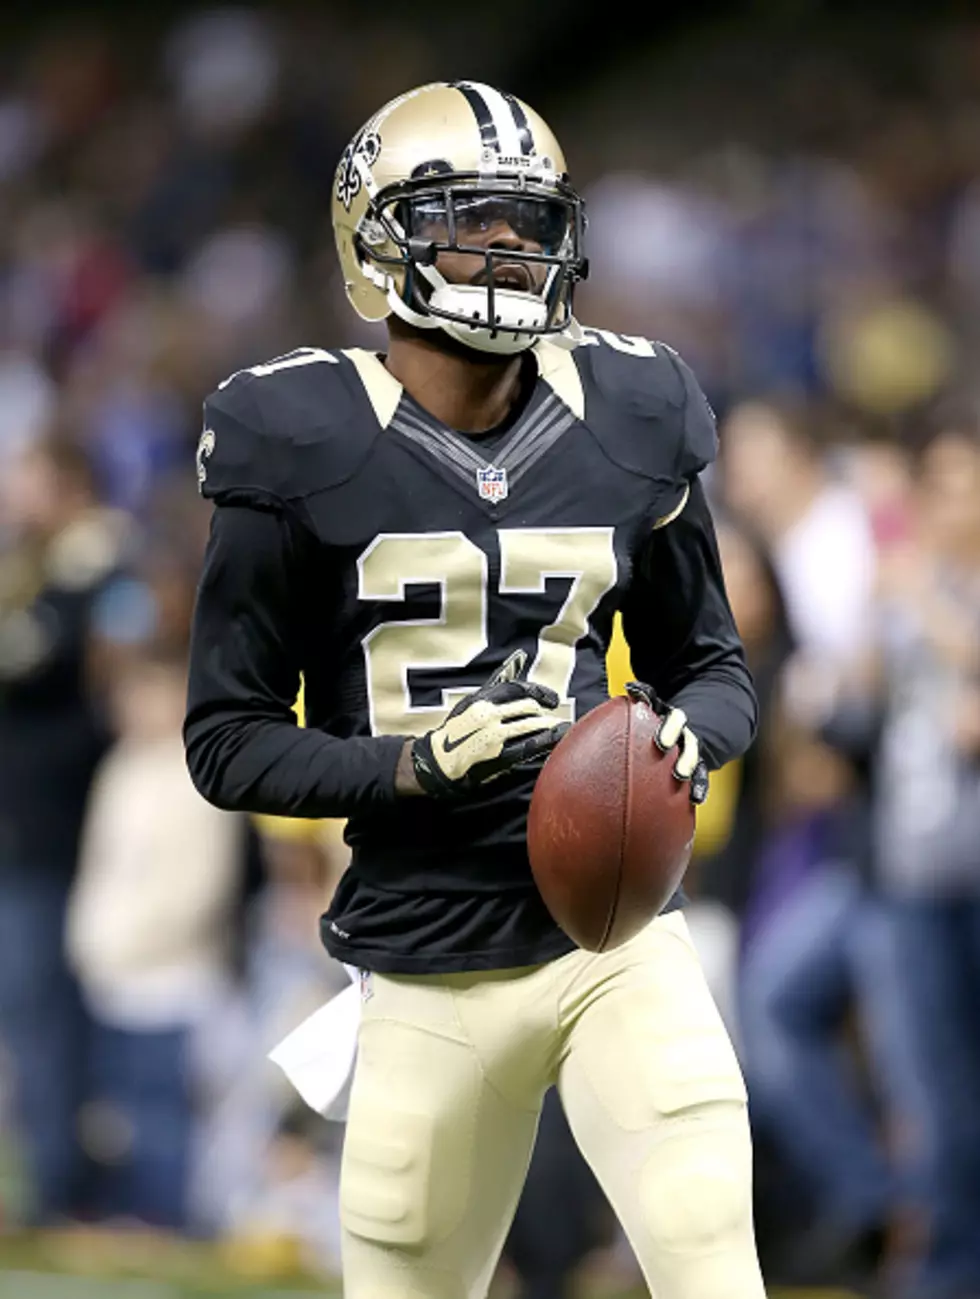 Report: Saints CB Damian Swann Suffered Third Concussion, Season In Doubt